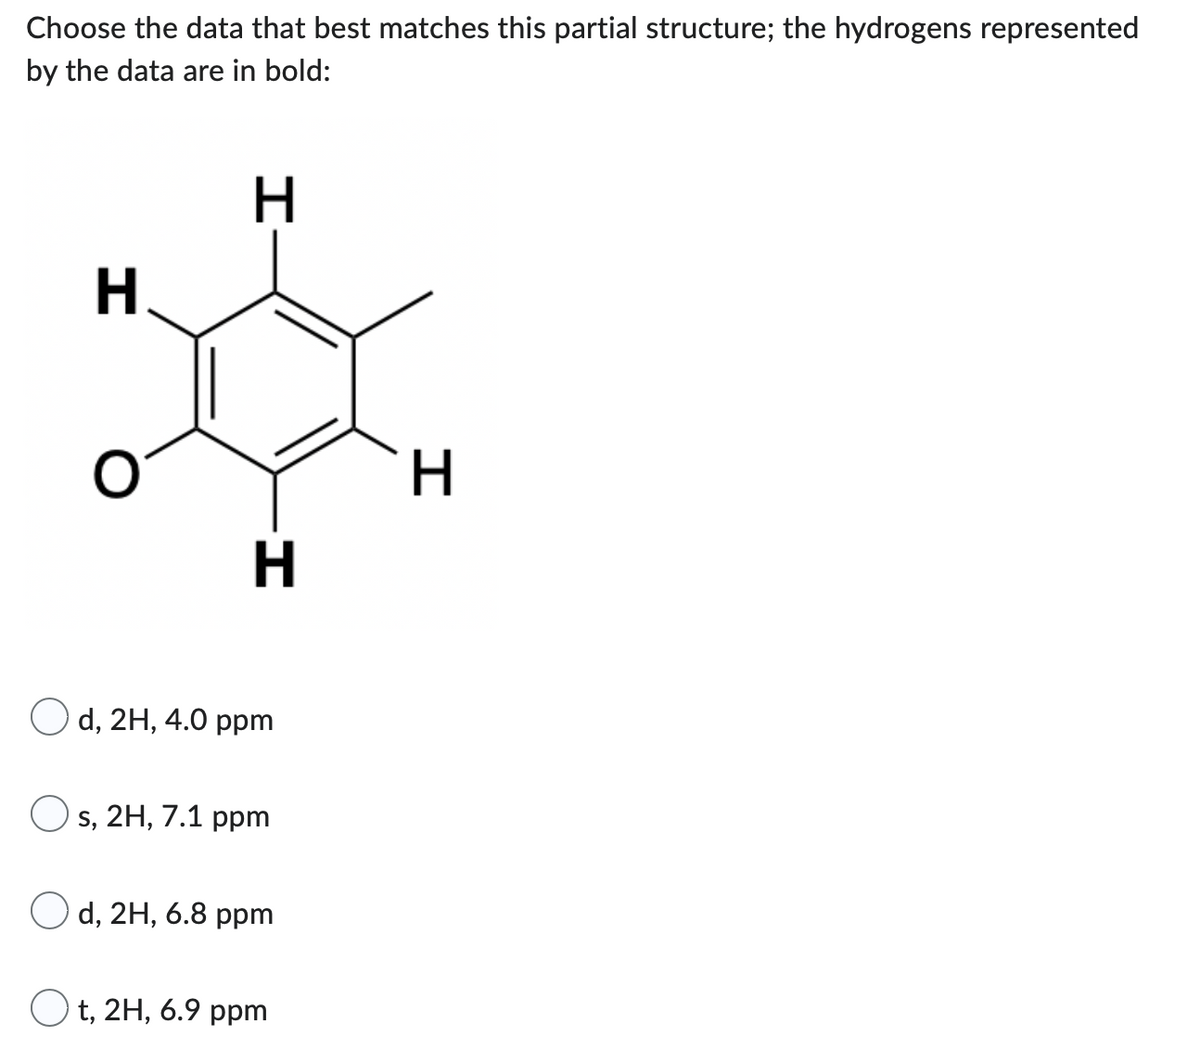 Choose the data that best matches this partial structure; the hydrogens represented
by the data are in bold:
H
H
H
Od, 2H, 4.0 ppm
Os, 2H, 7.1 ppm
Od, 2H, 6.8 ppm
Ot, 2H, 6.9 ppm
H